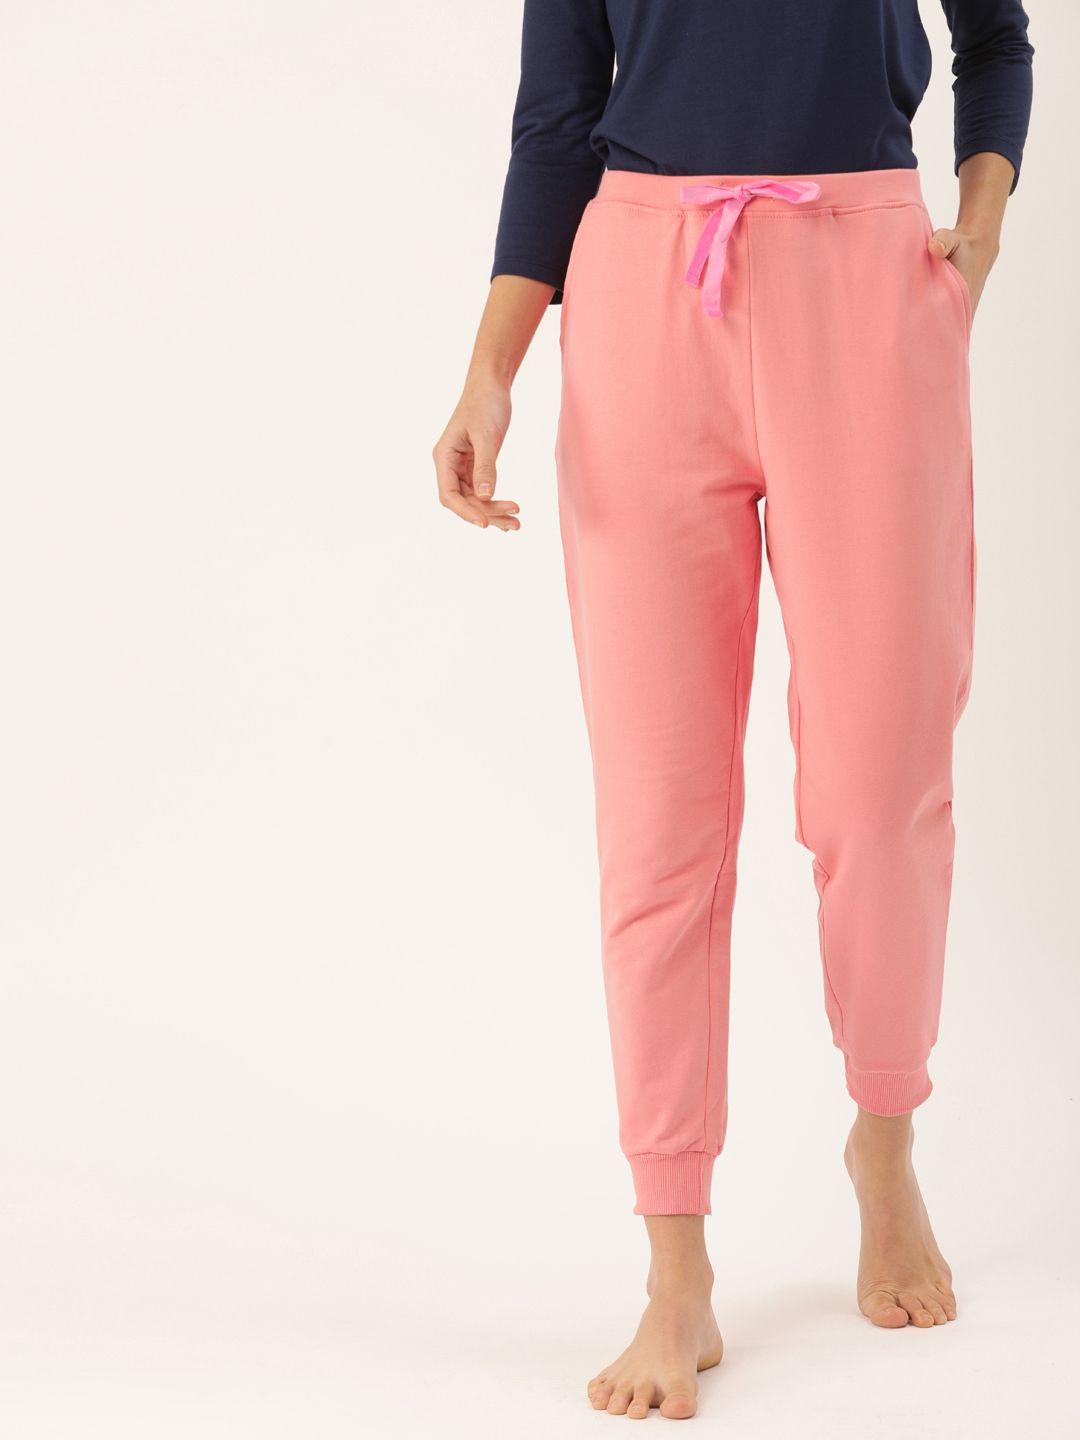 dressberry-women-pink-solid-cropped-lounge-pants